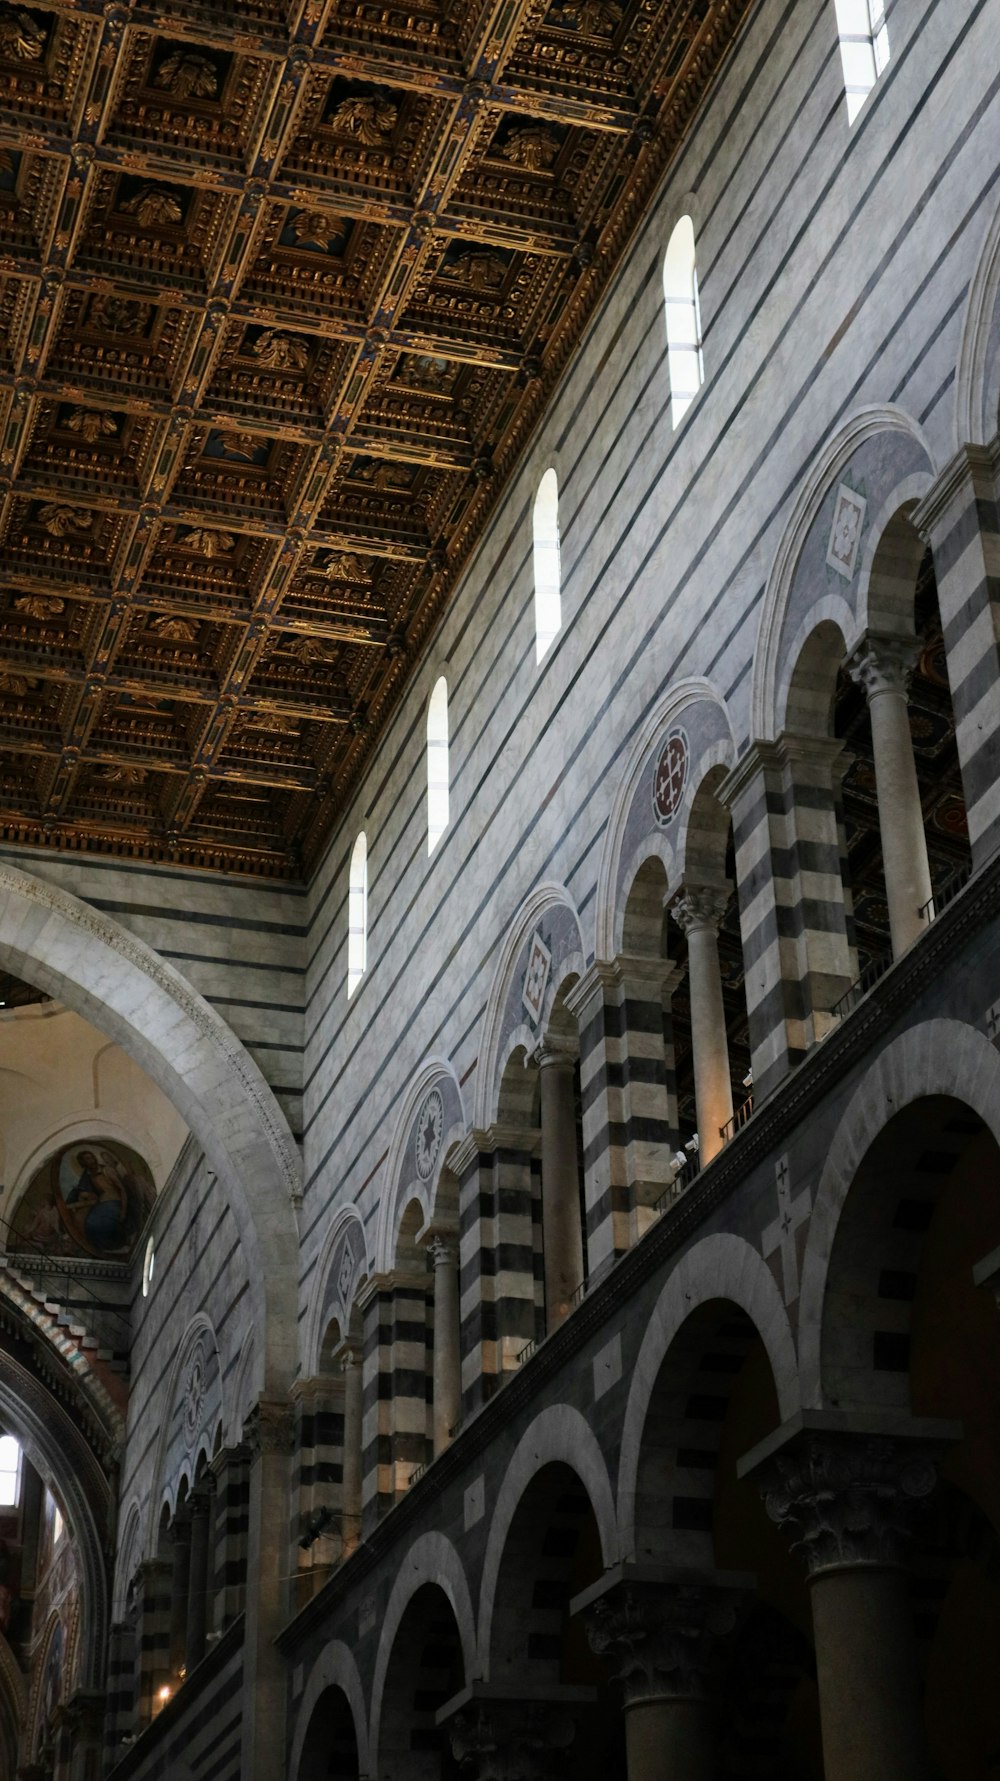 the ceiling of a building with arches and arches